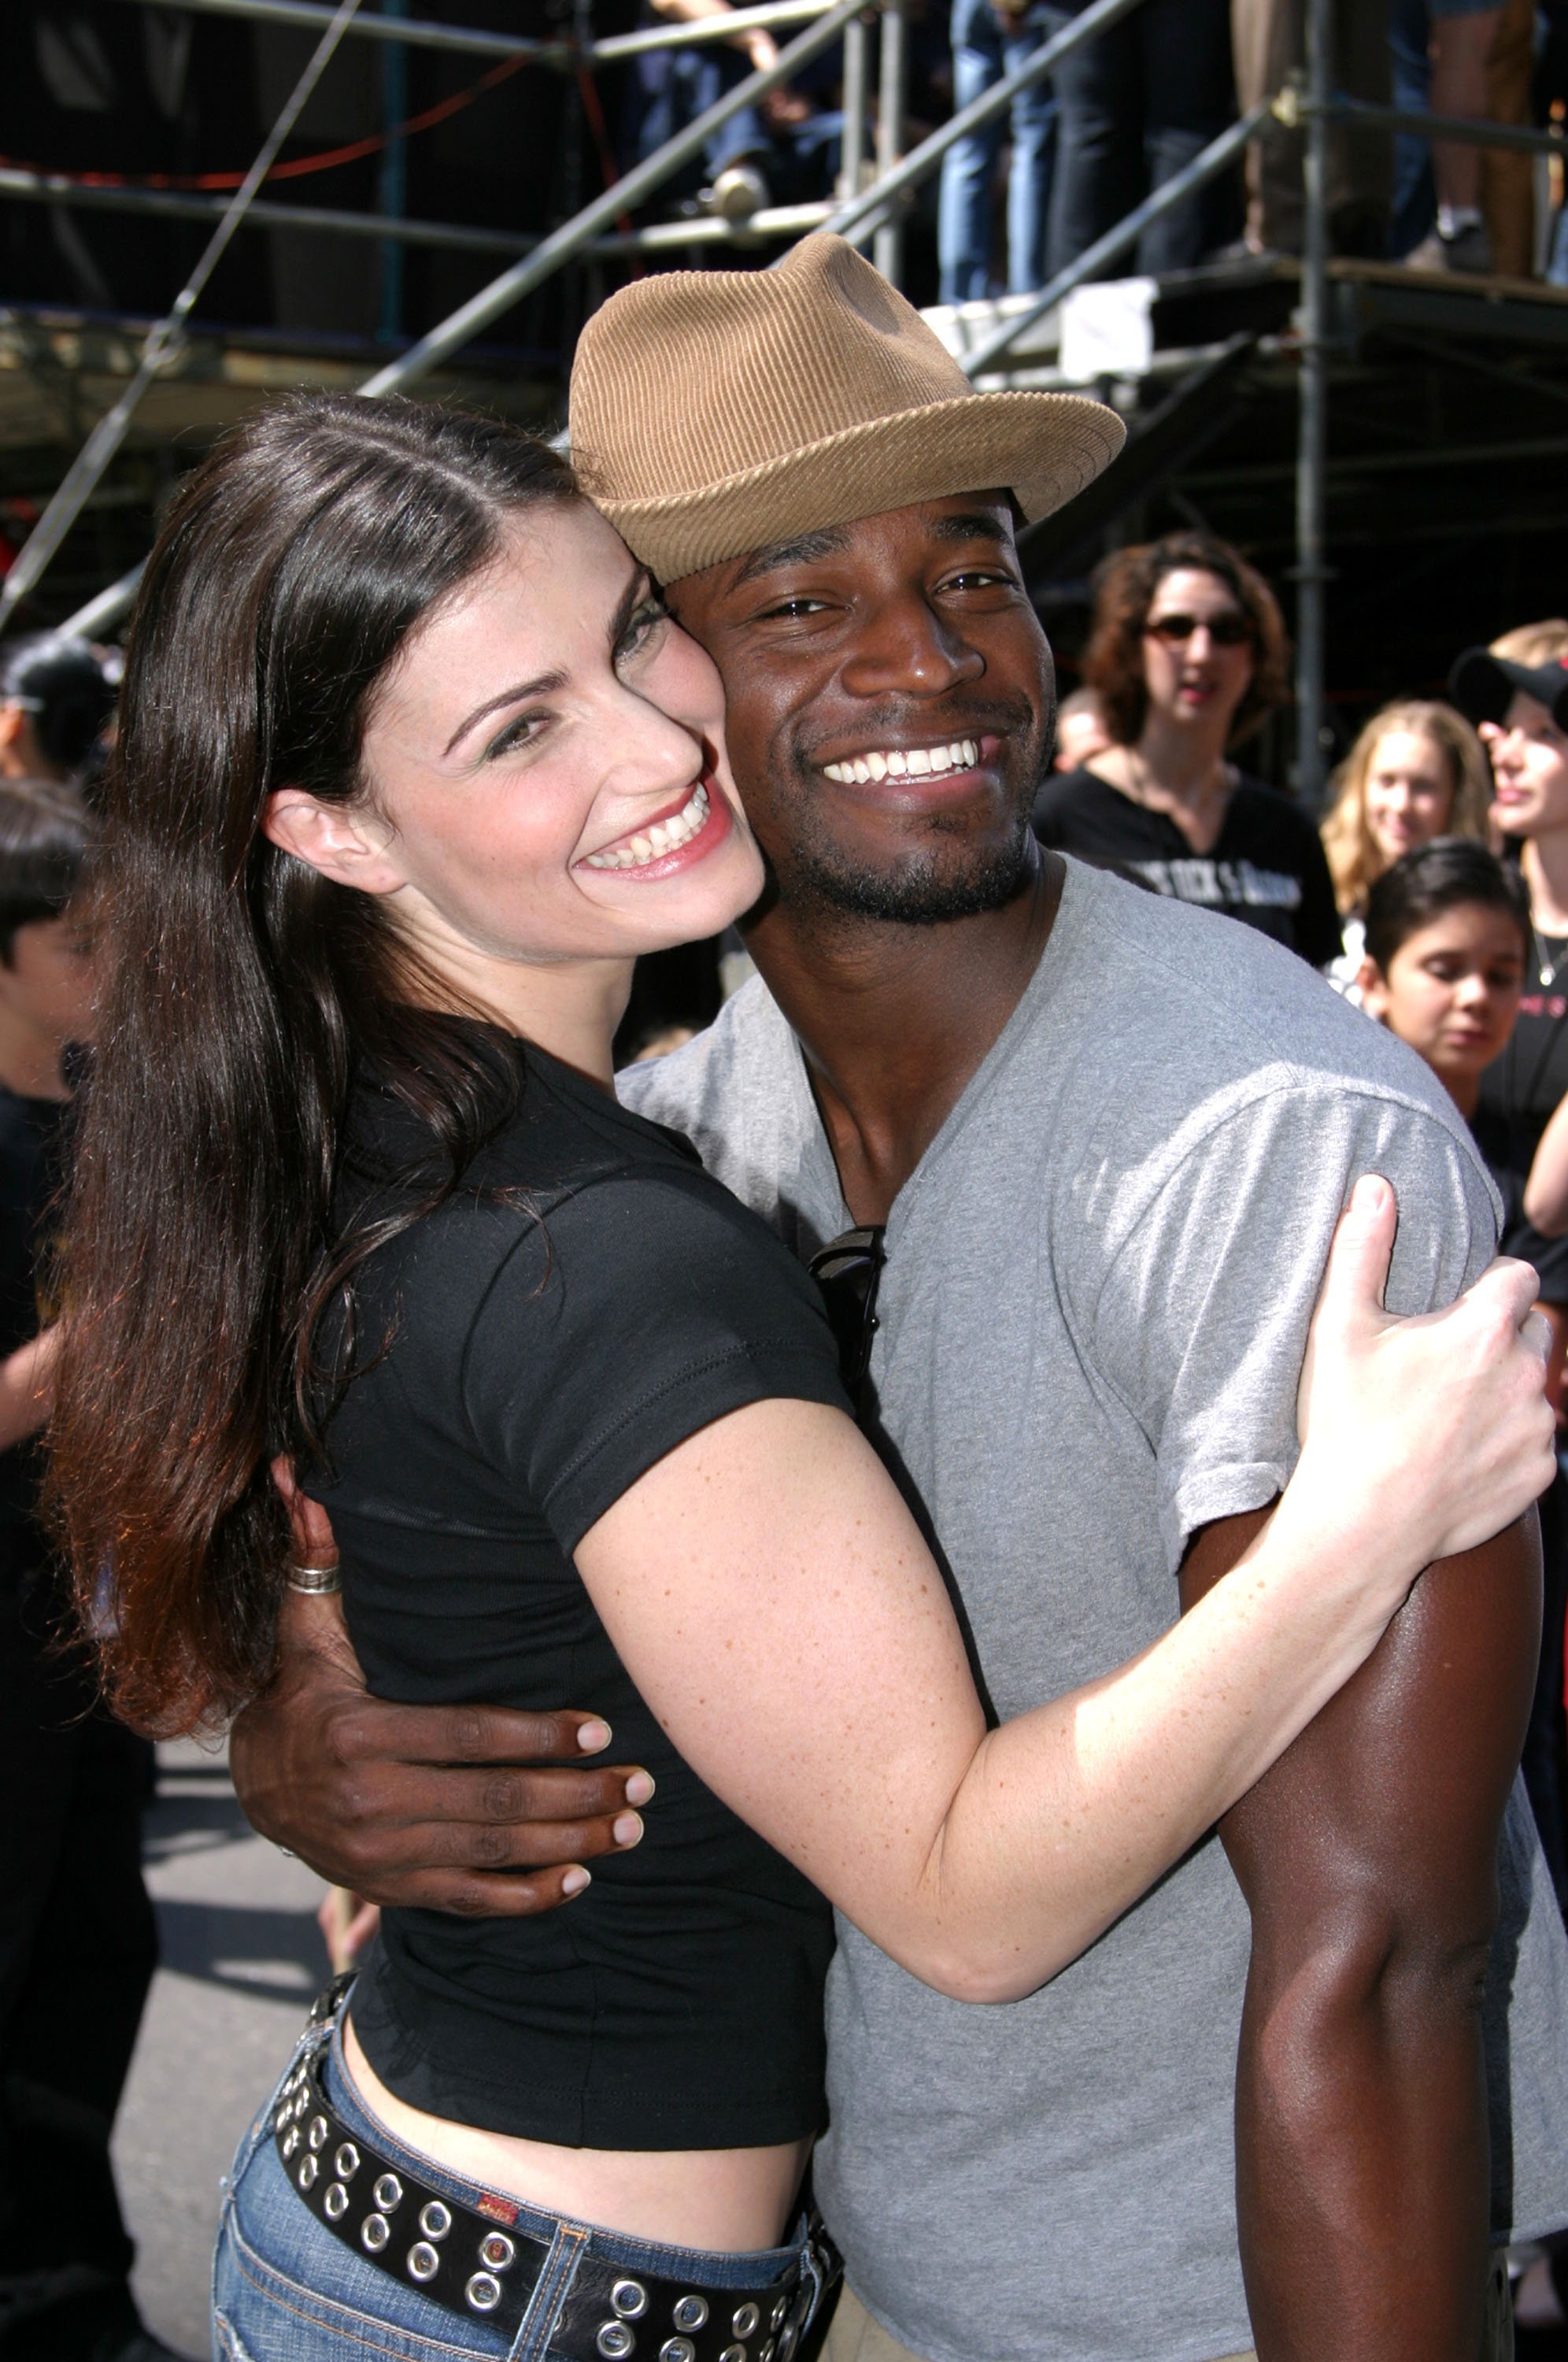 Taye Diggs and ex-wife Idina Menzel at unspecified event | Source: Getty Image